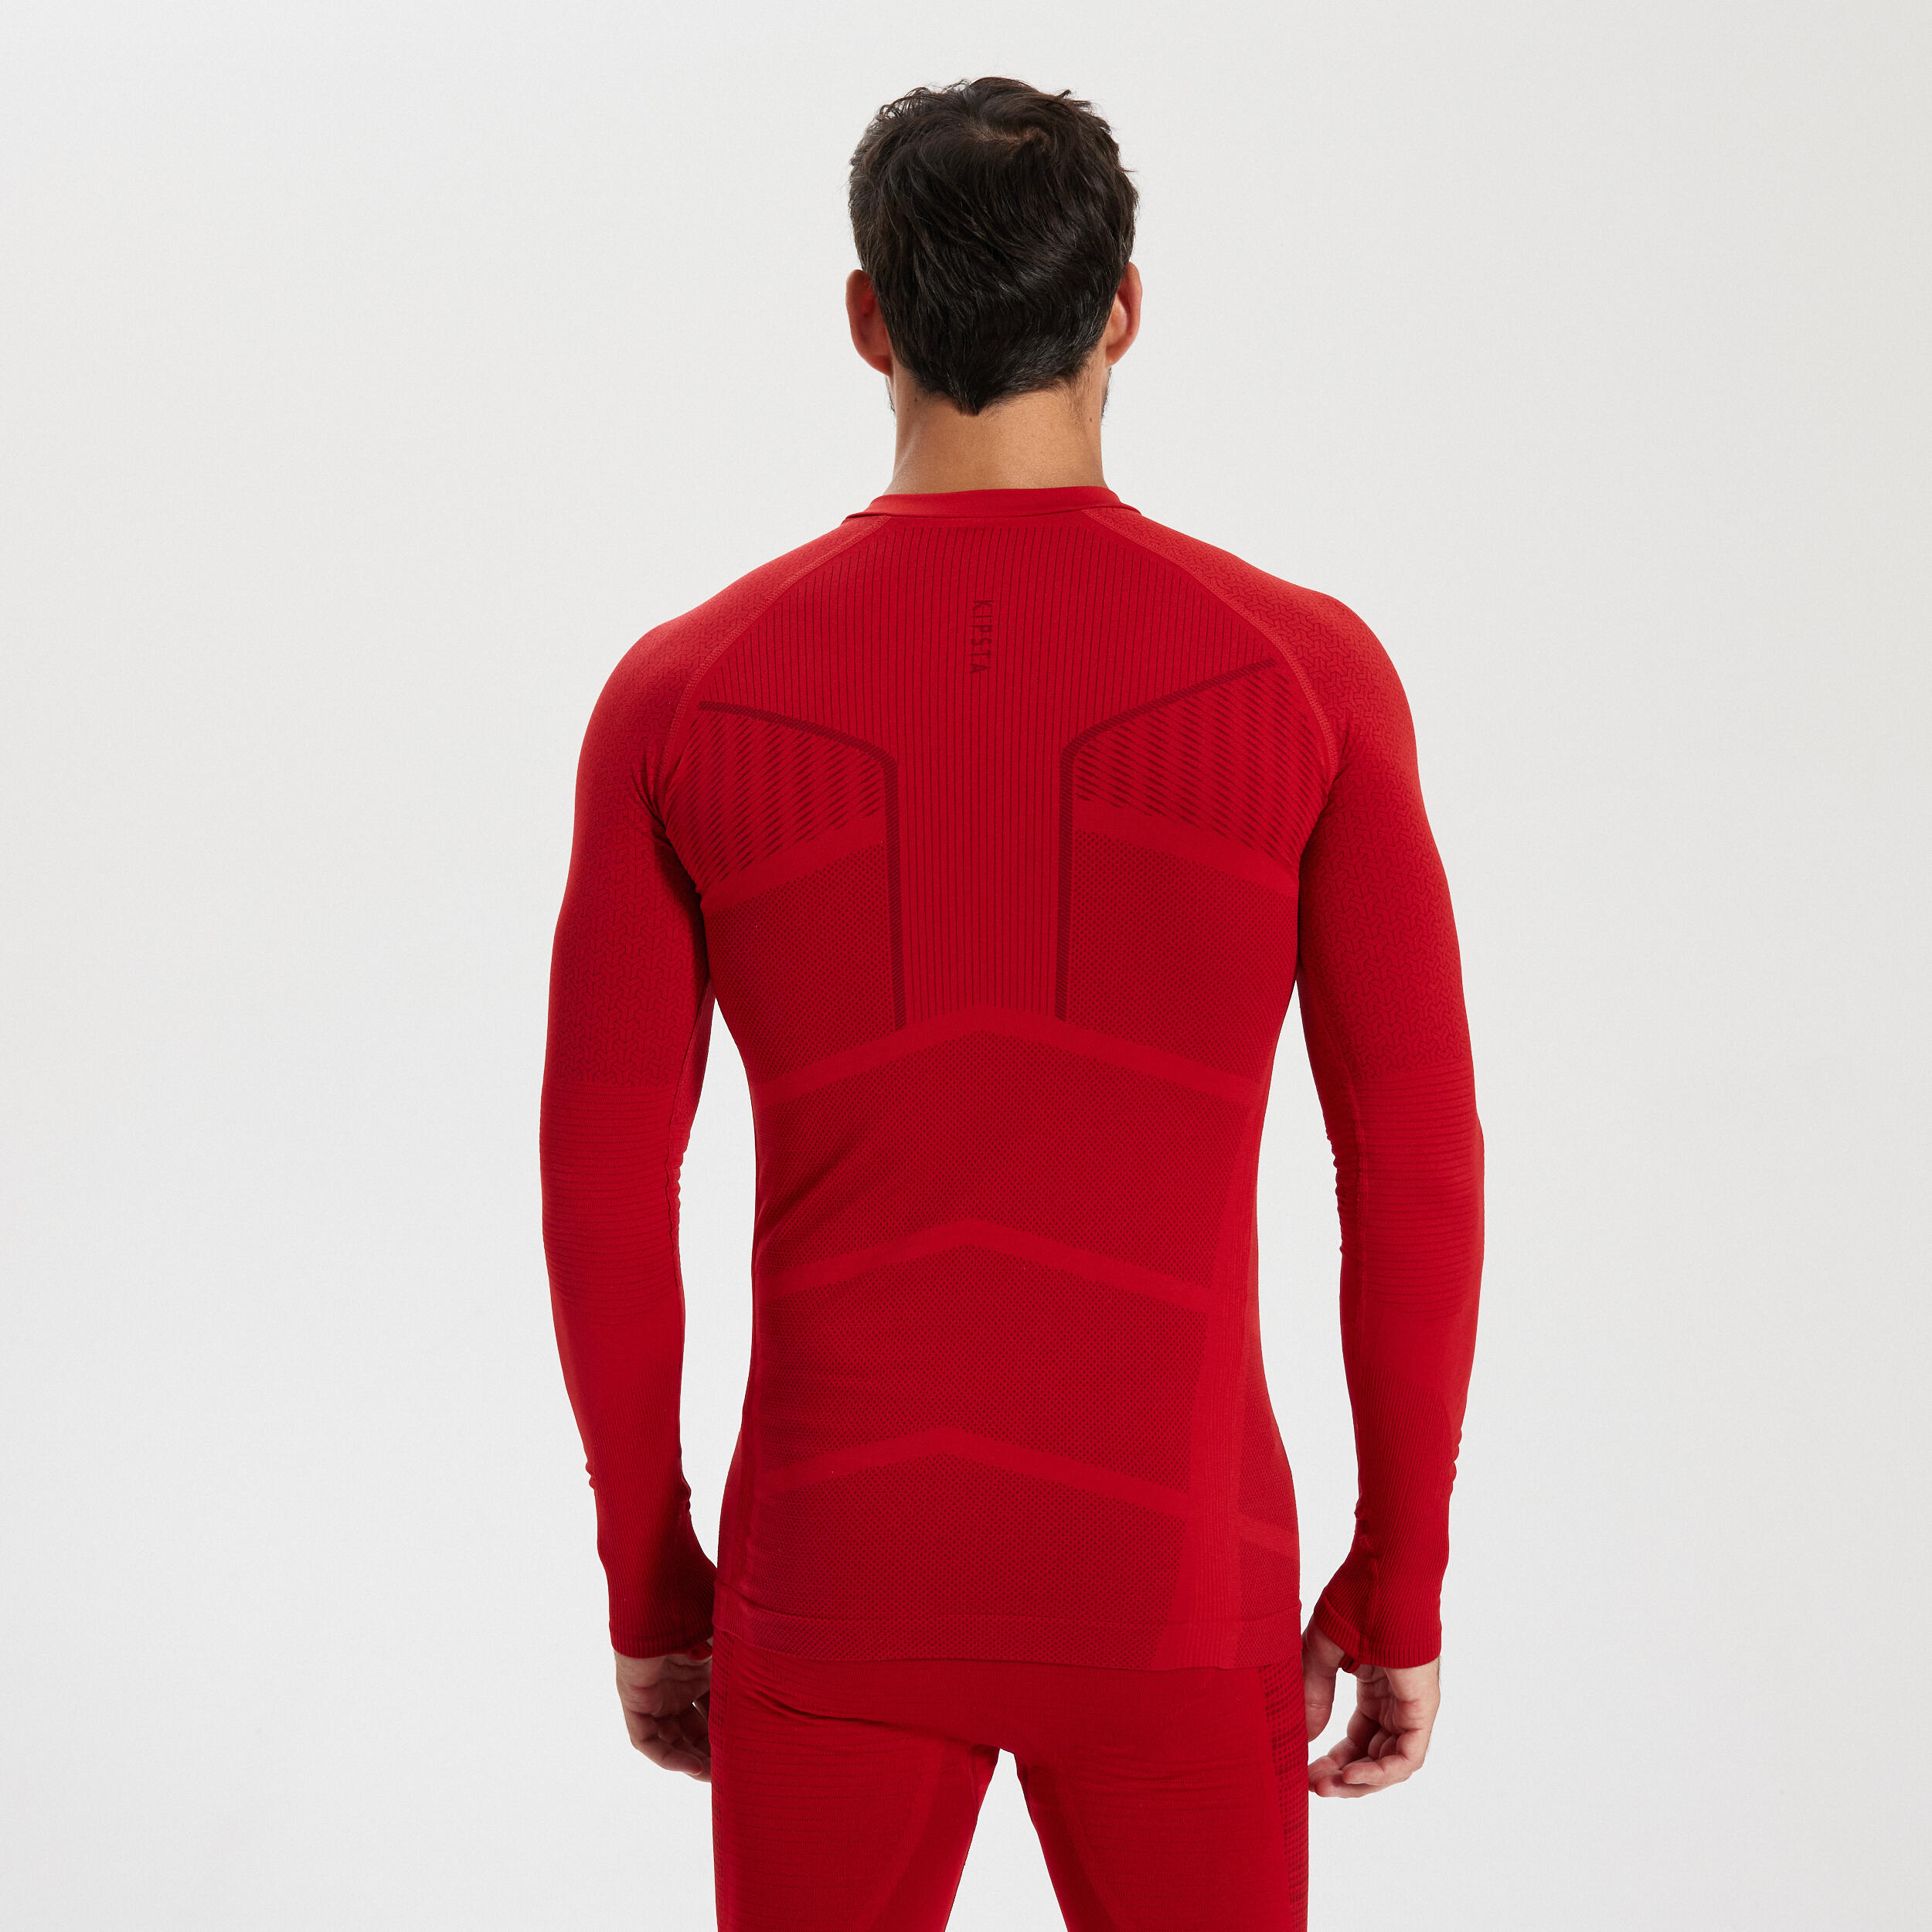 Adult Long-Sleeved Thermal Base Layer Top Keepdry 500 - Red 6/15